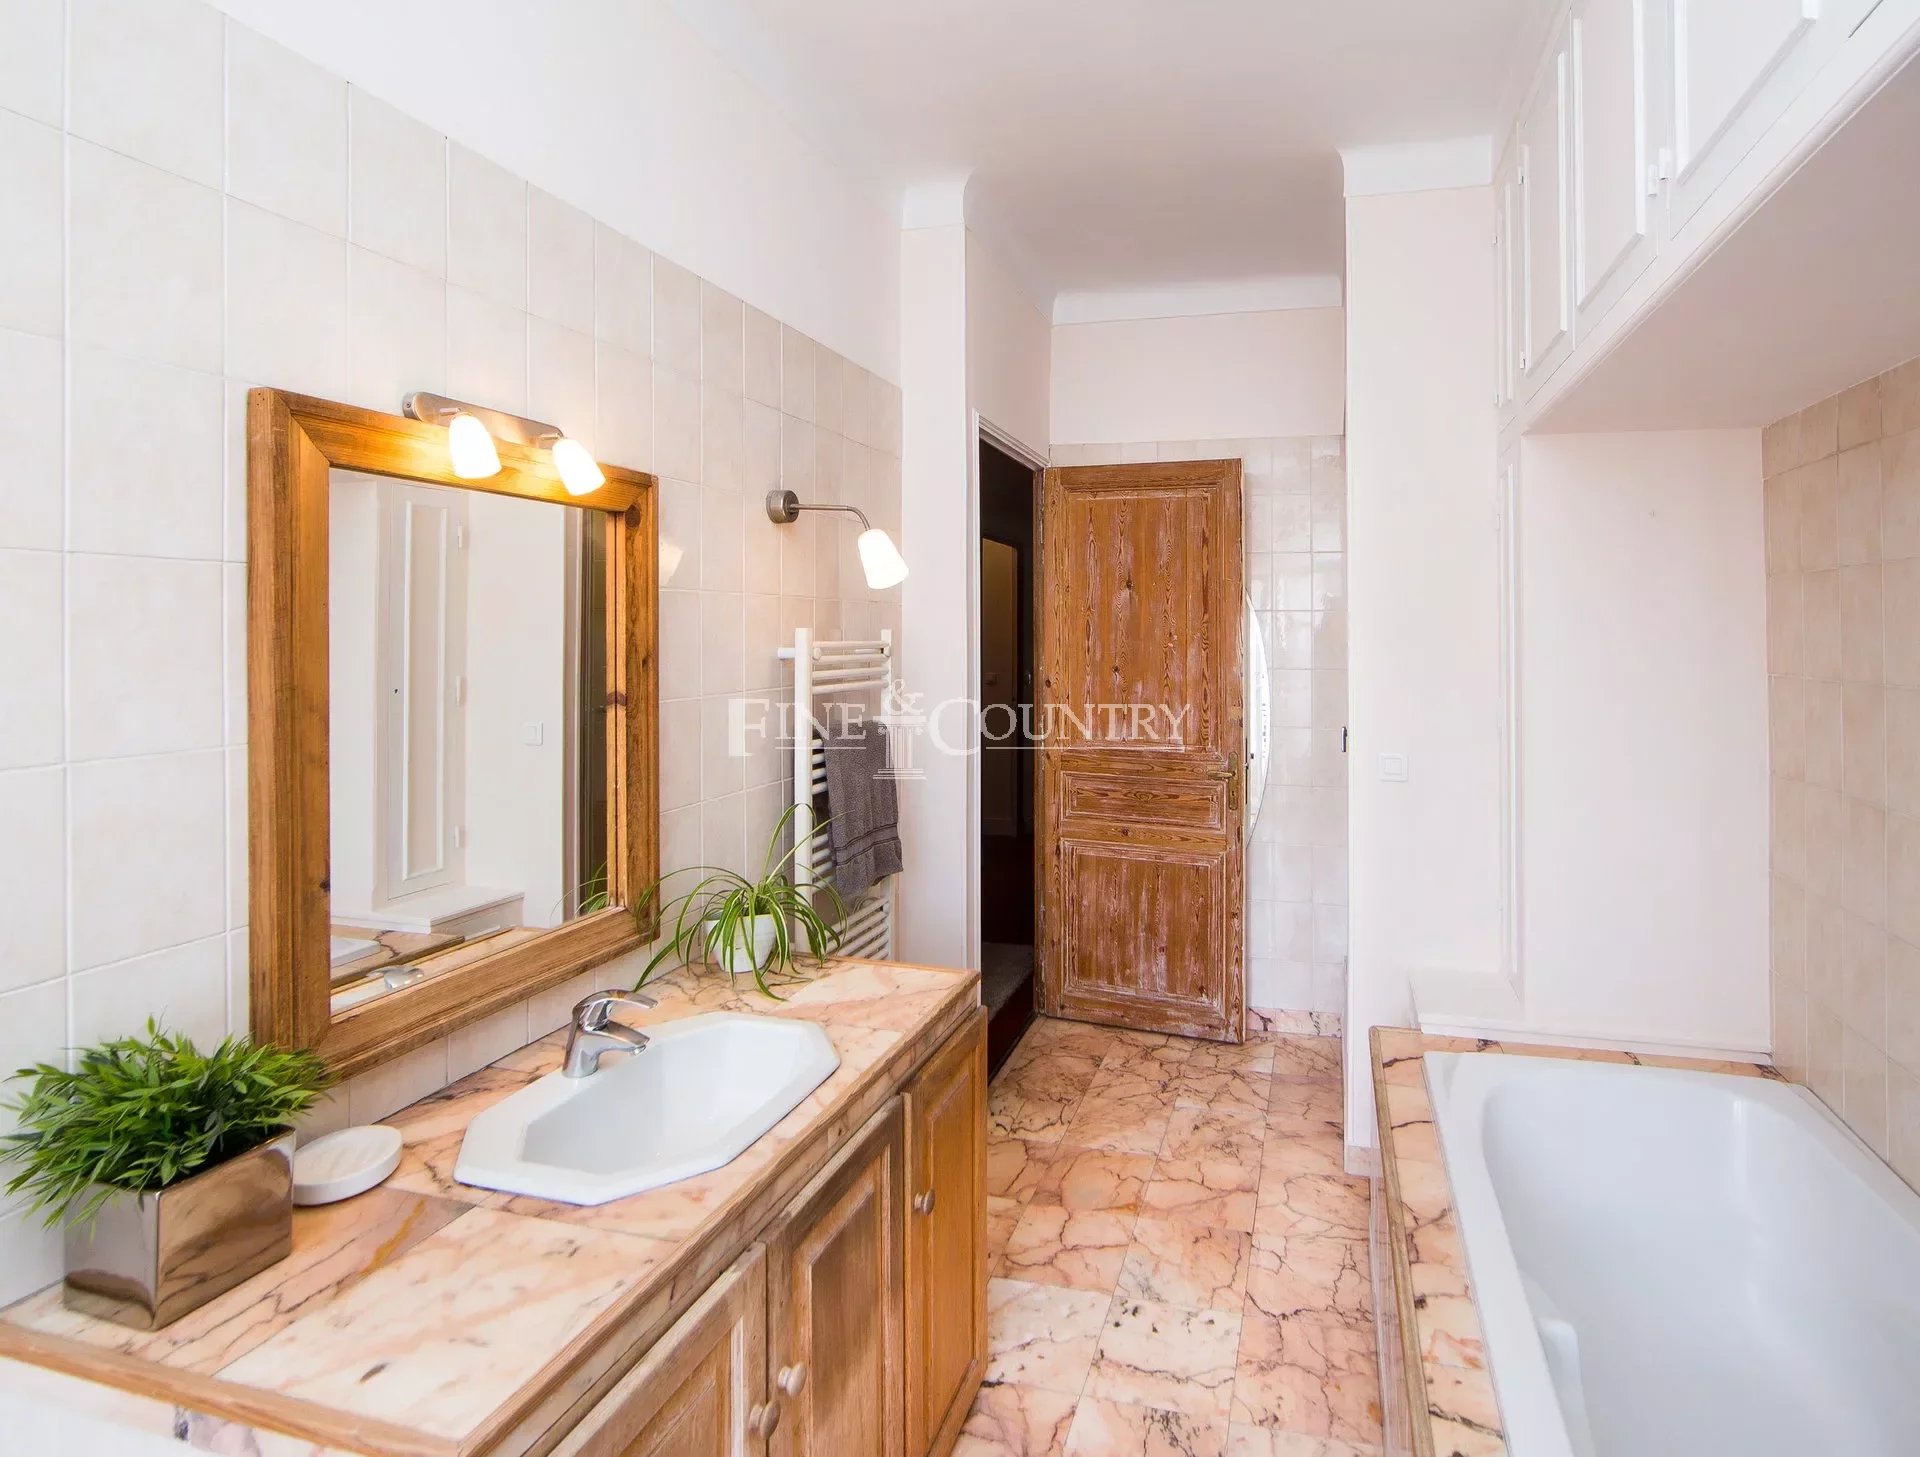 Photo of Apartment for sale in the Banane, Cannes